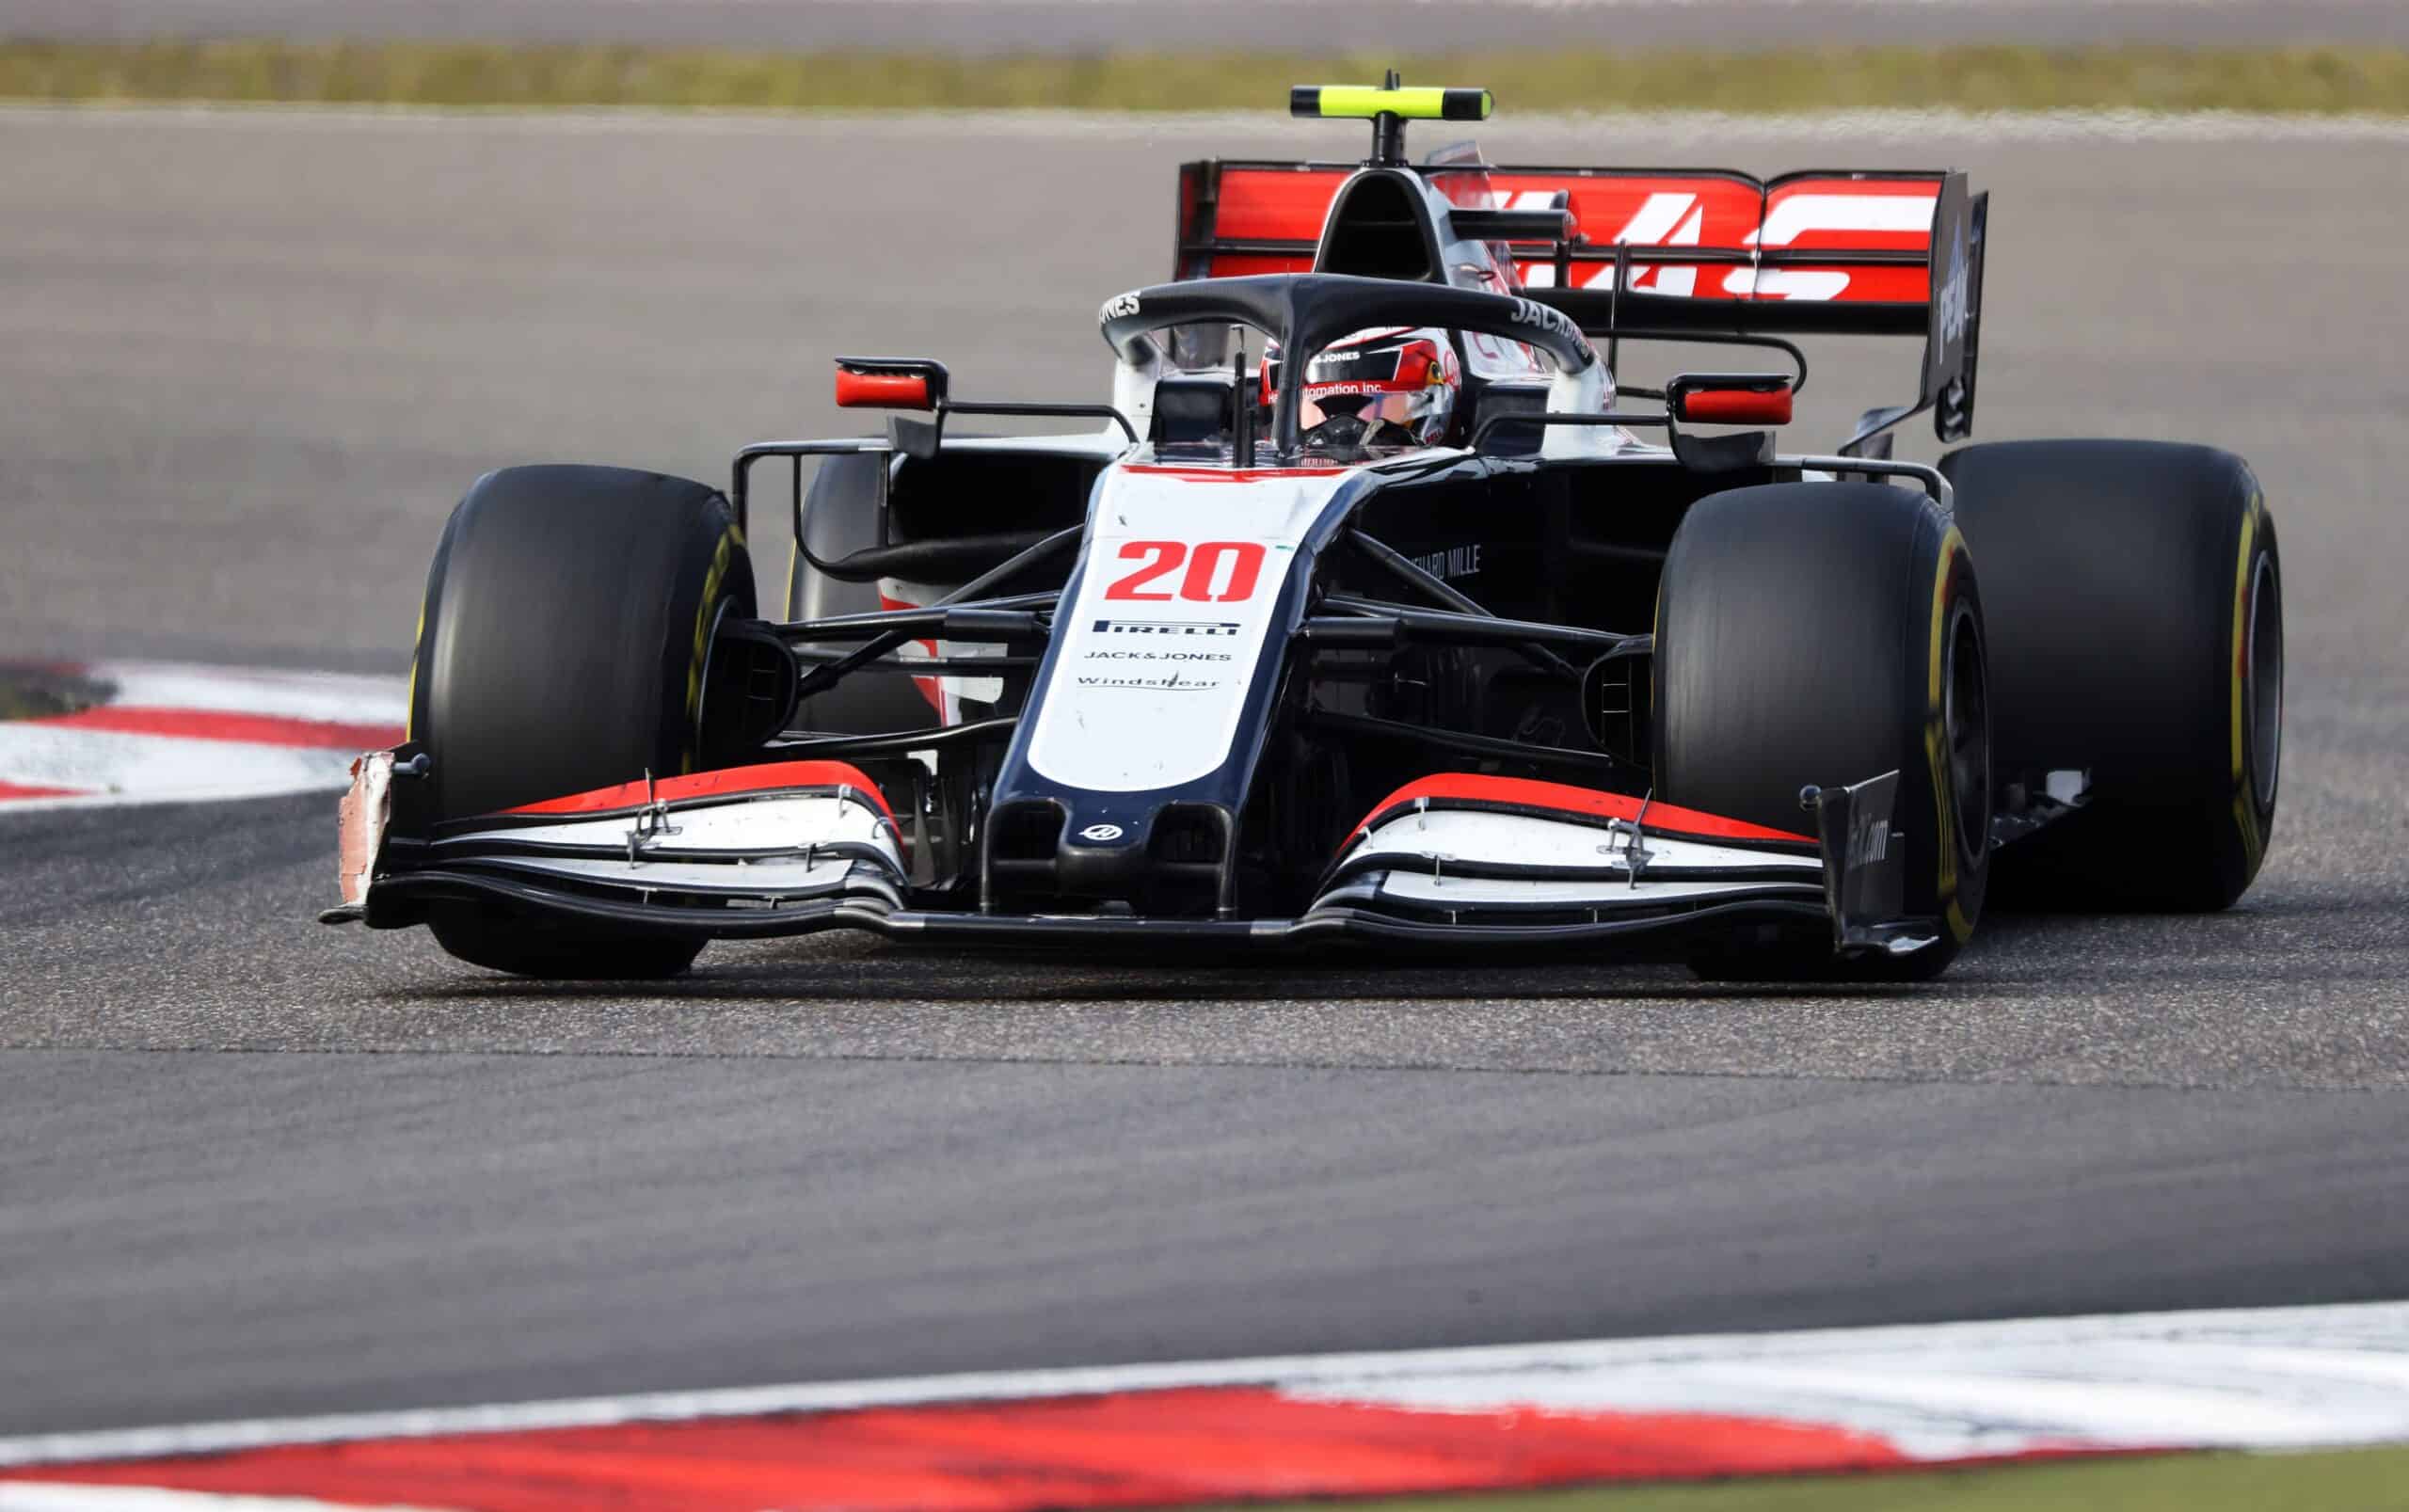 Haas F1 Driver Kevin Magnussen